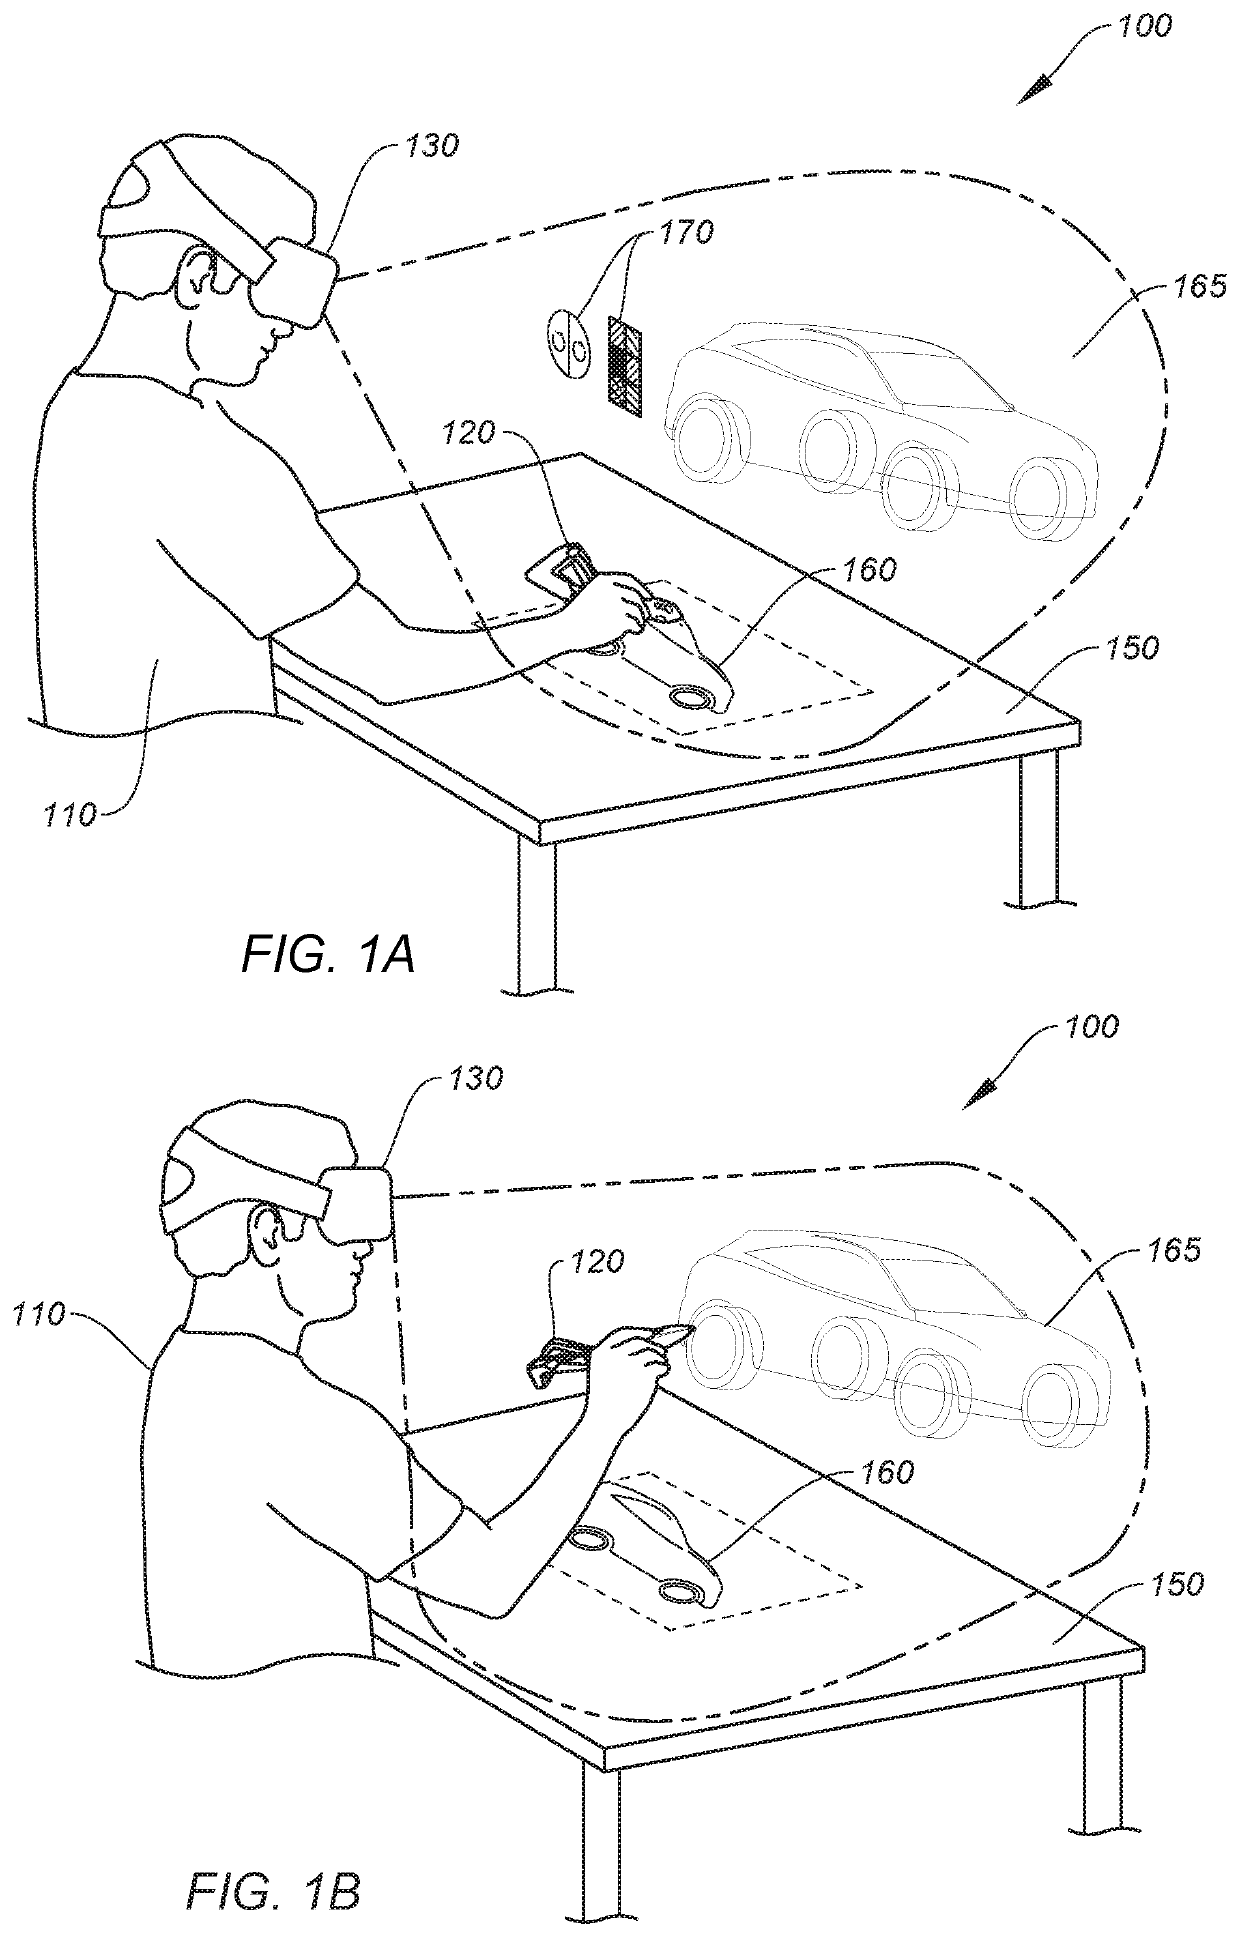 Input device for use in 2d and 3D environments